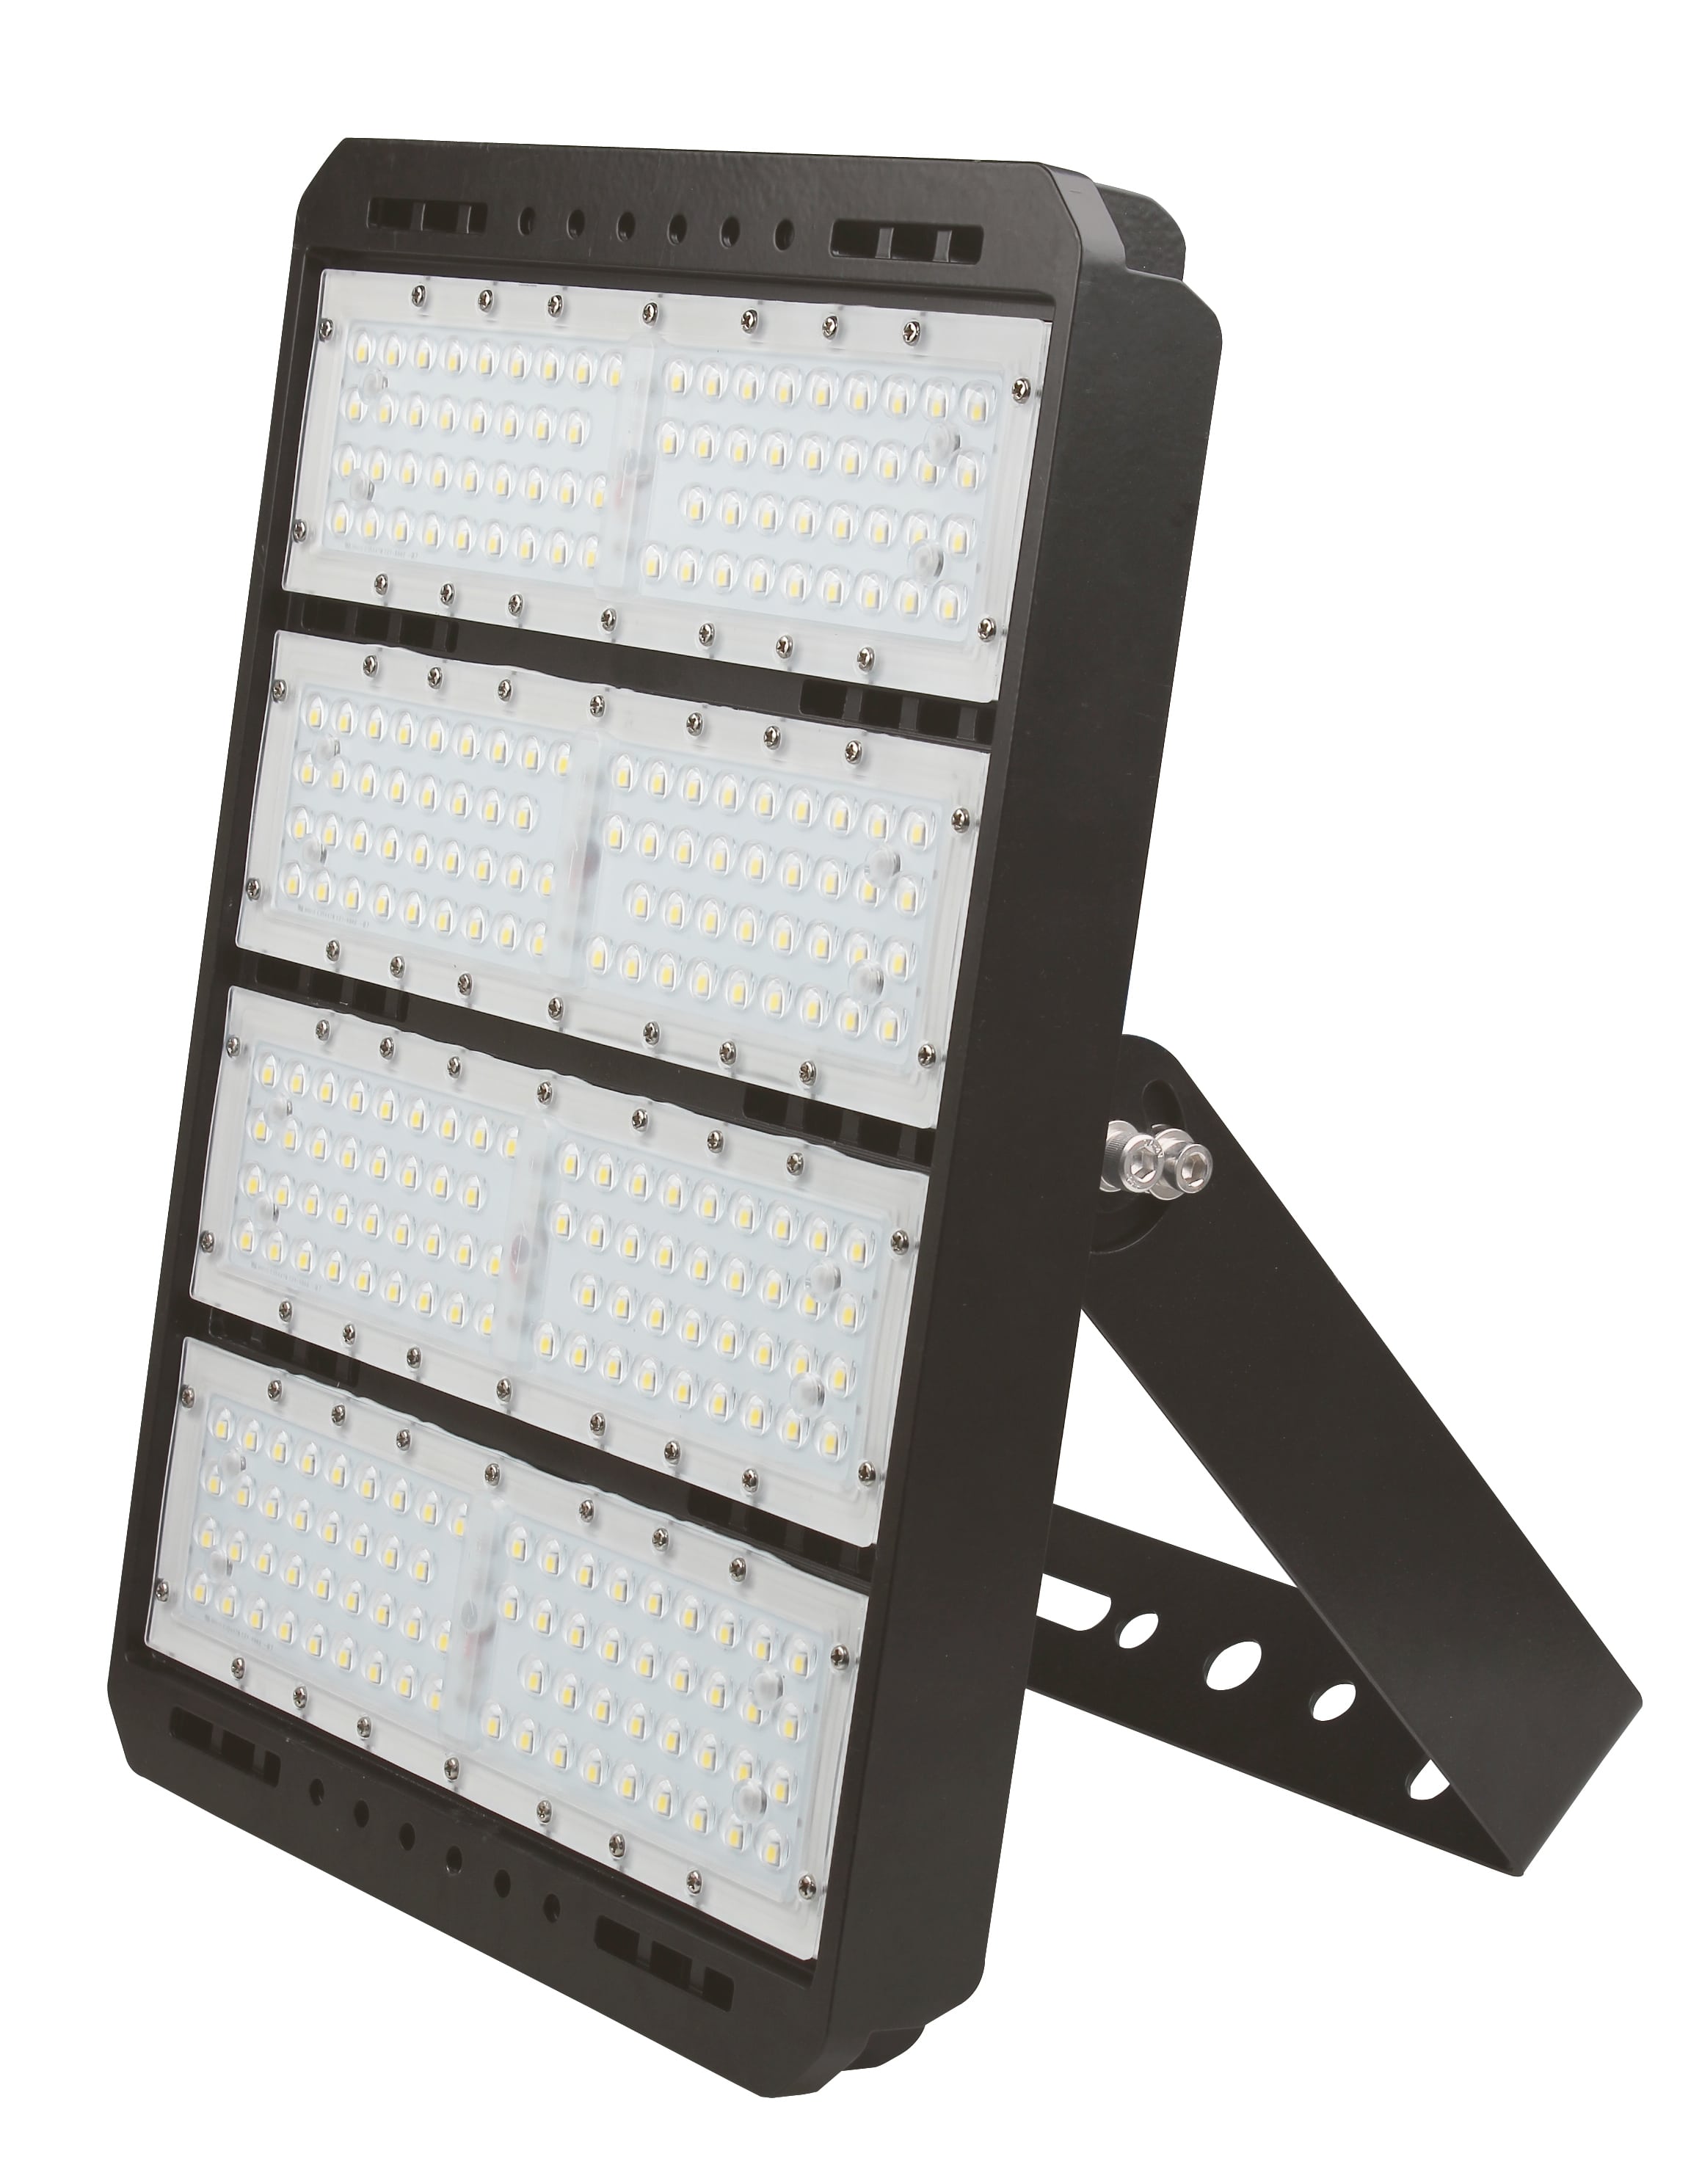 China 1000w Halogen Floodlight Led Equivalent Suppliers,, 40% OFF